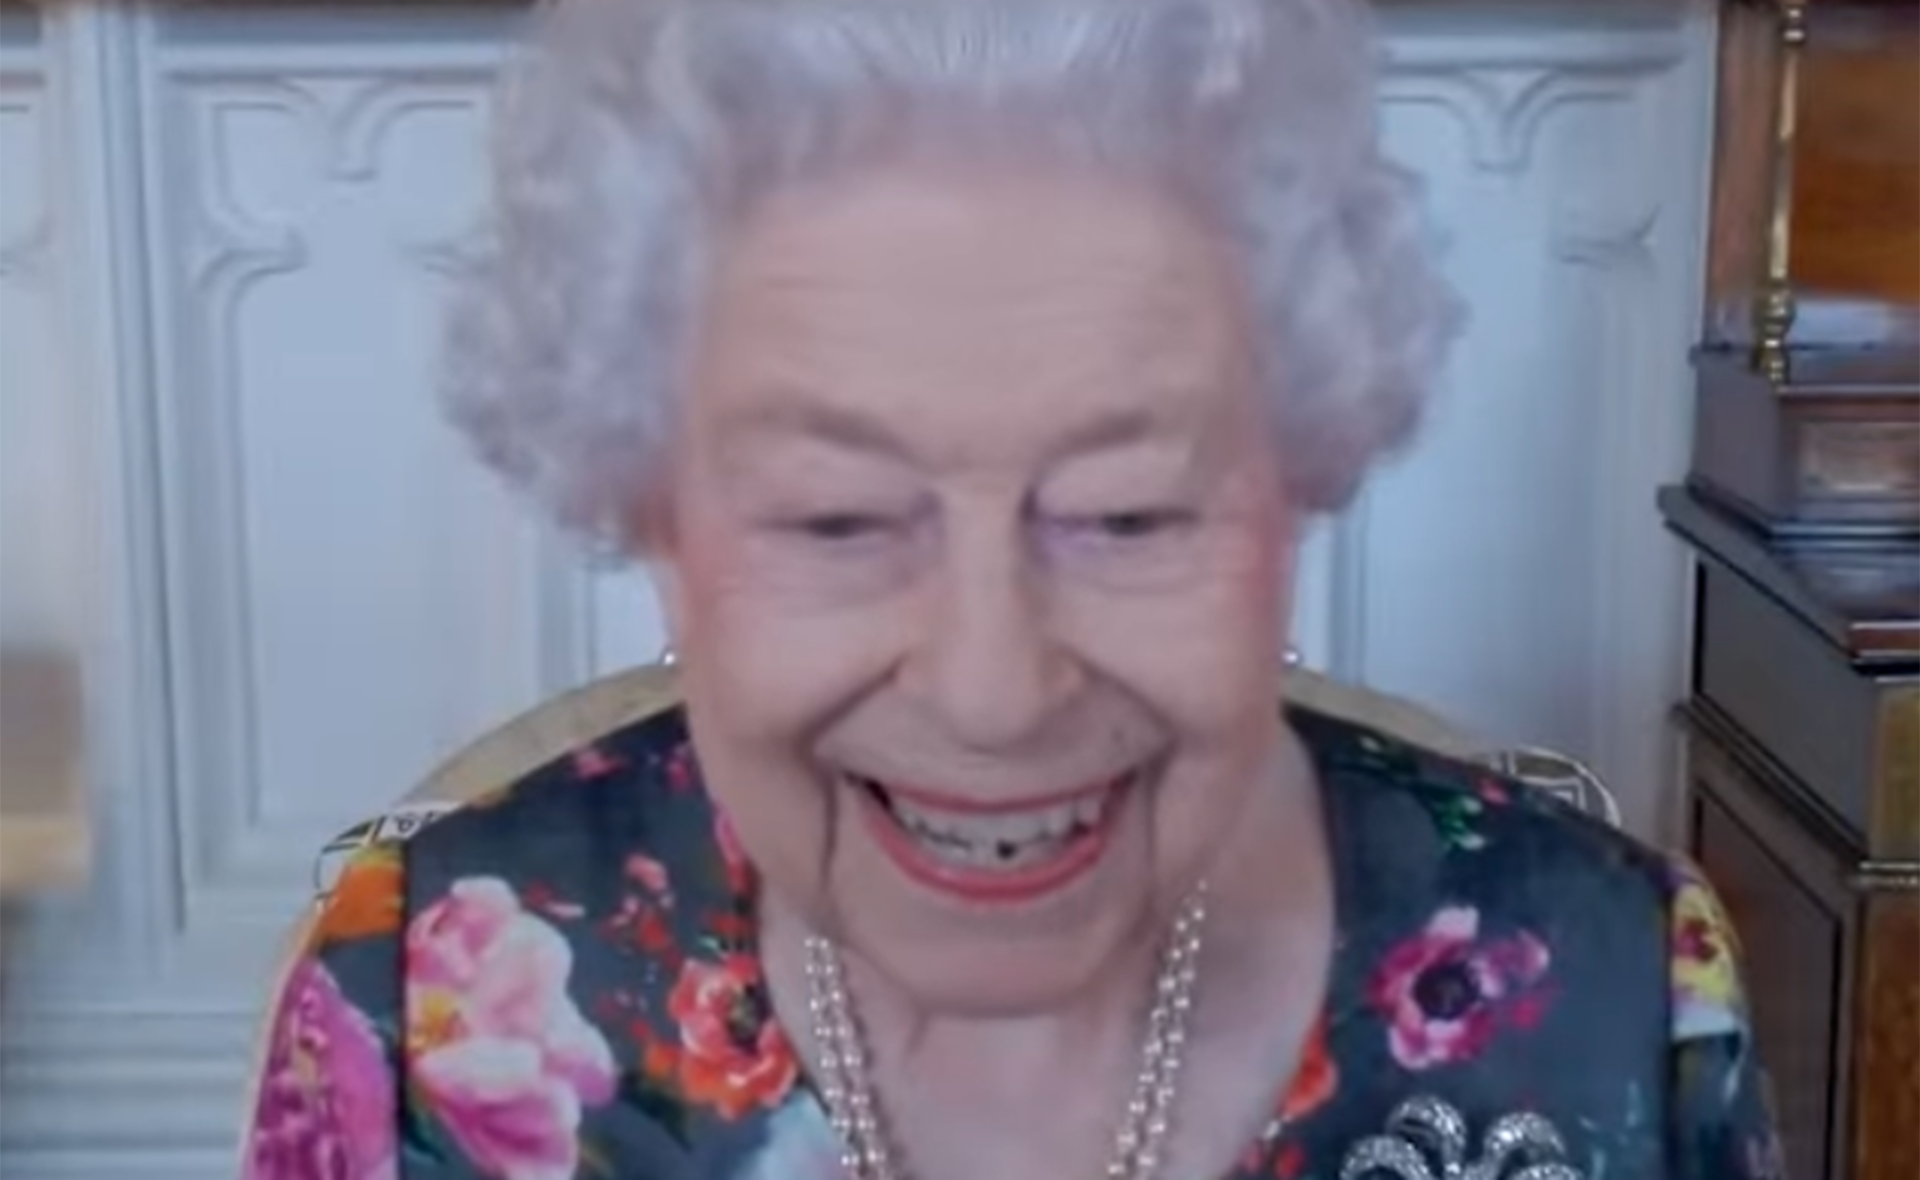 The Queen is all smiles in a reassuring new video after her latest health scare